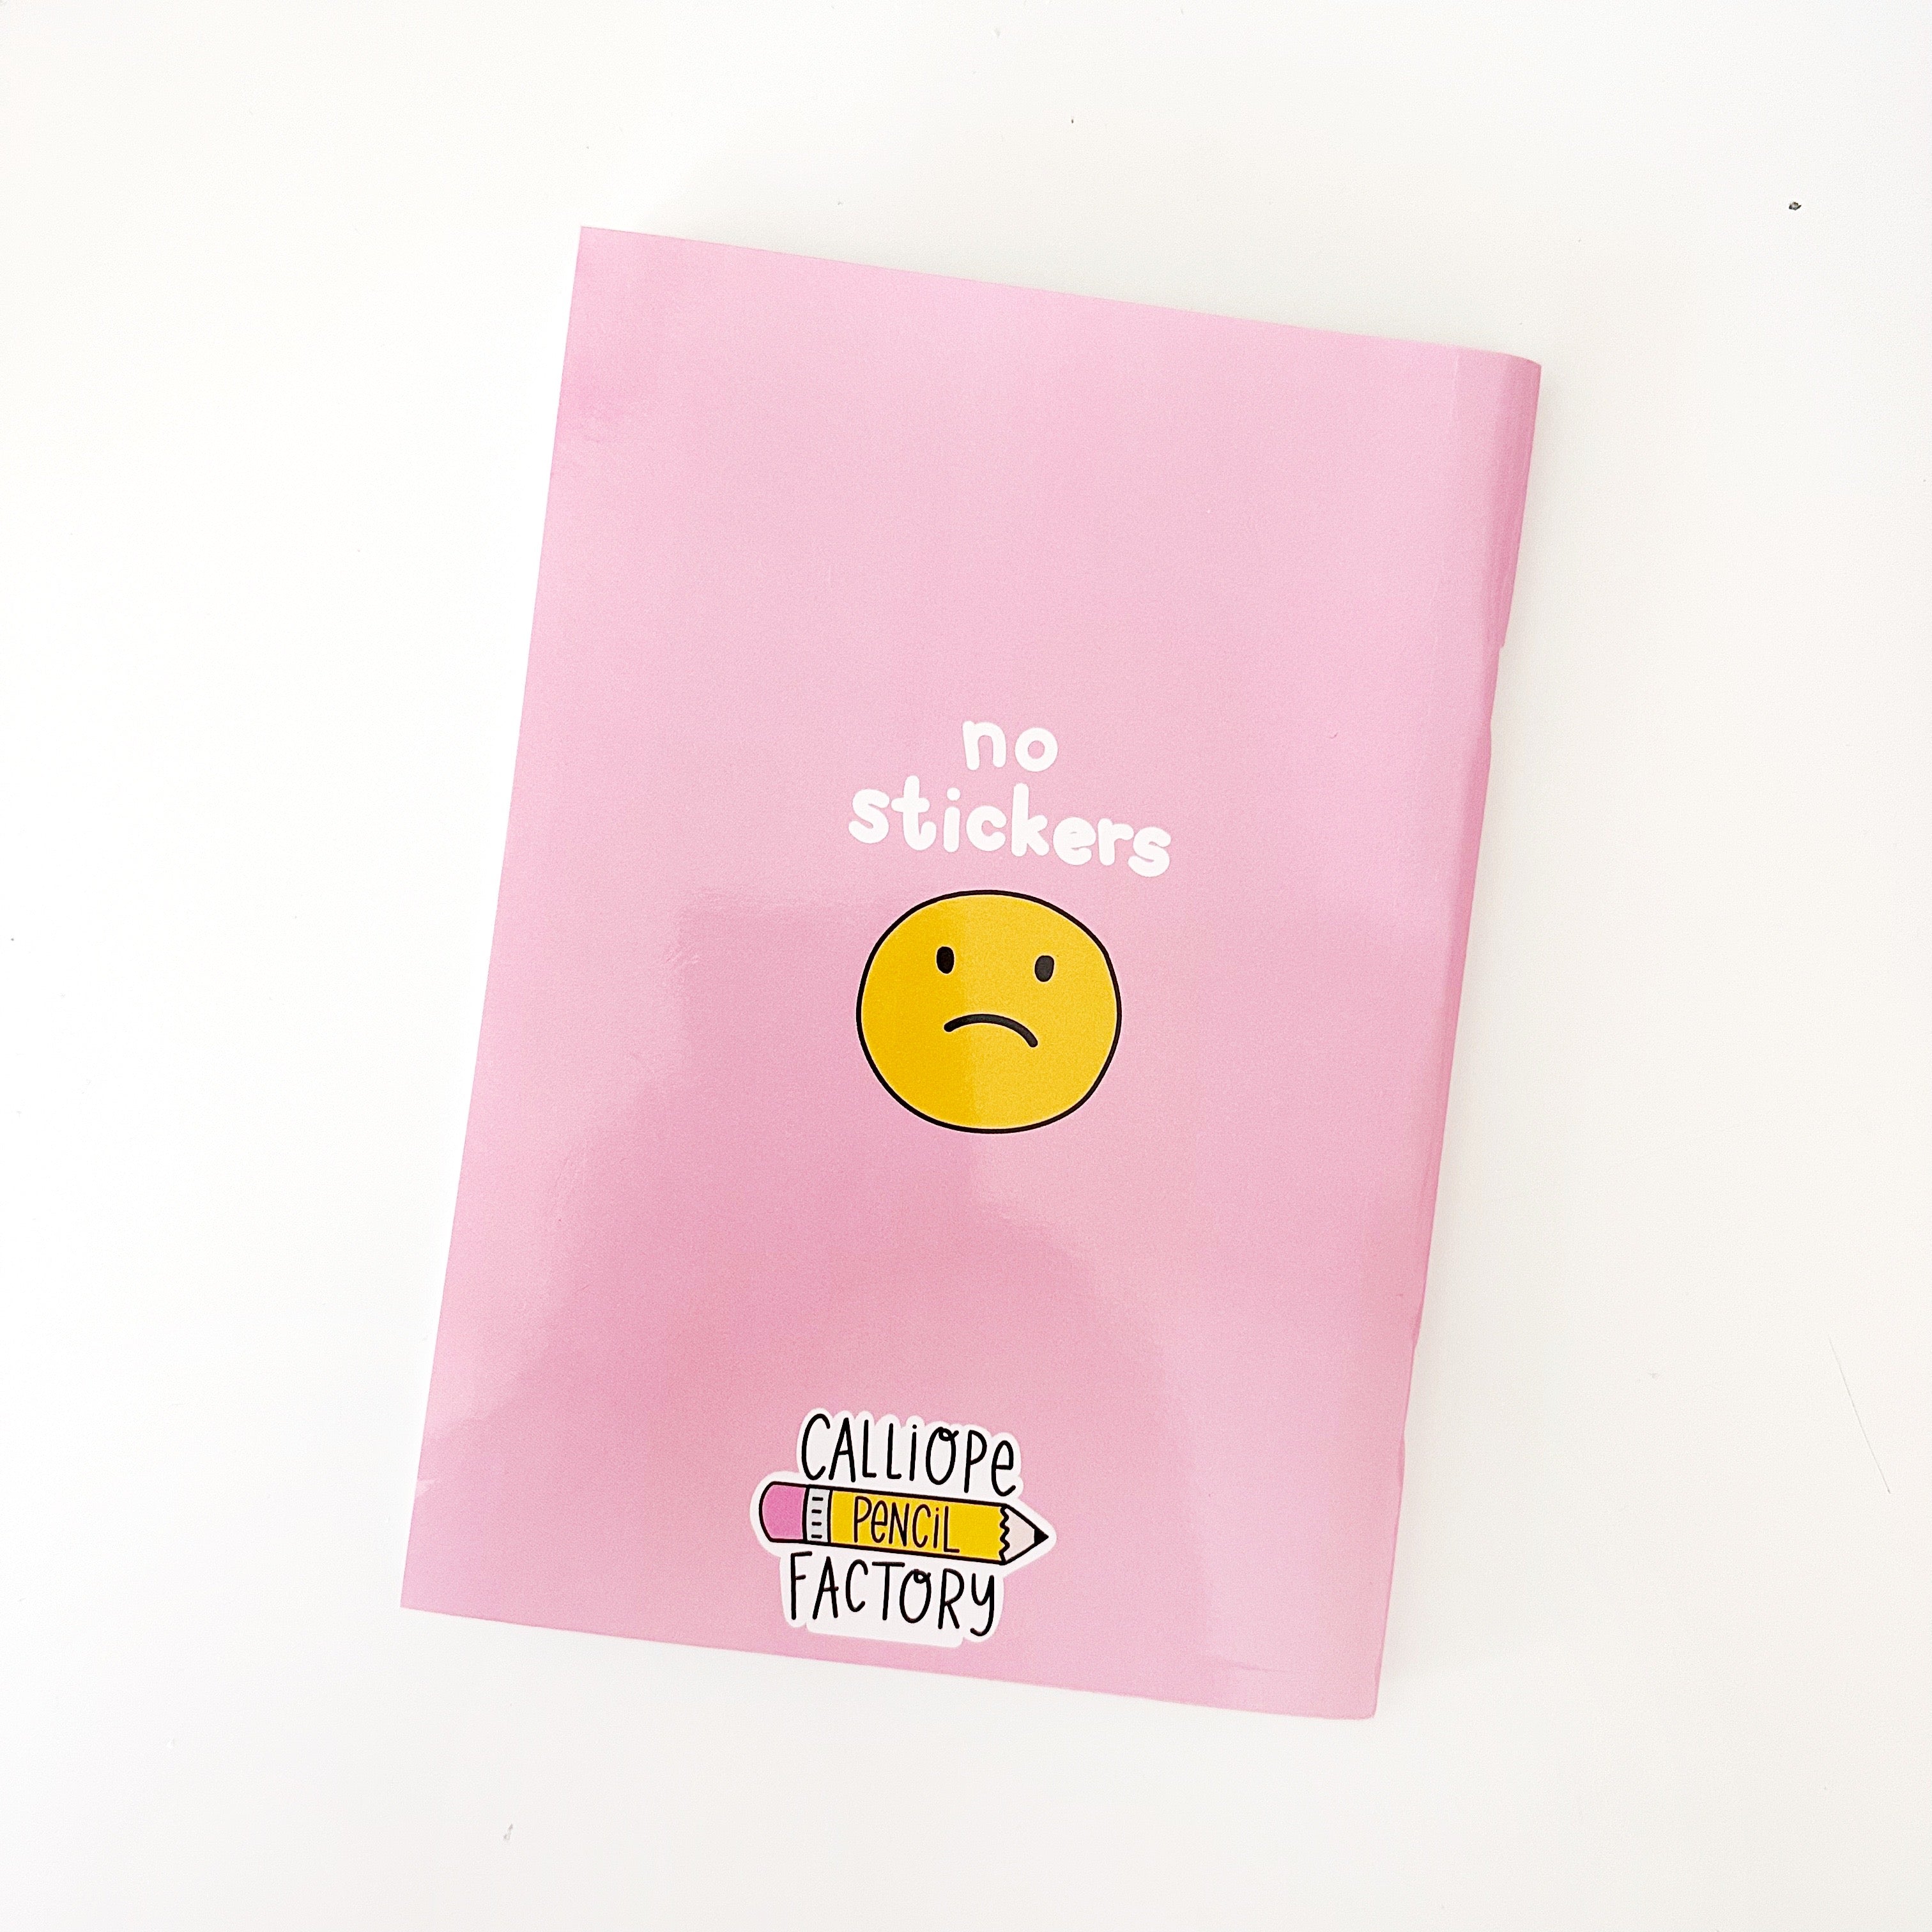 Image of back of book with pink background with image of a sad yellow sad face and white text says, "No stickers". 